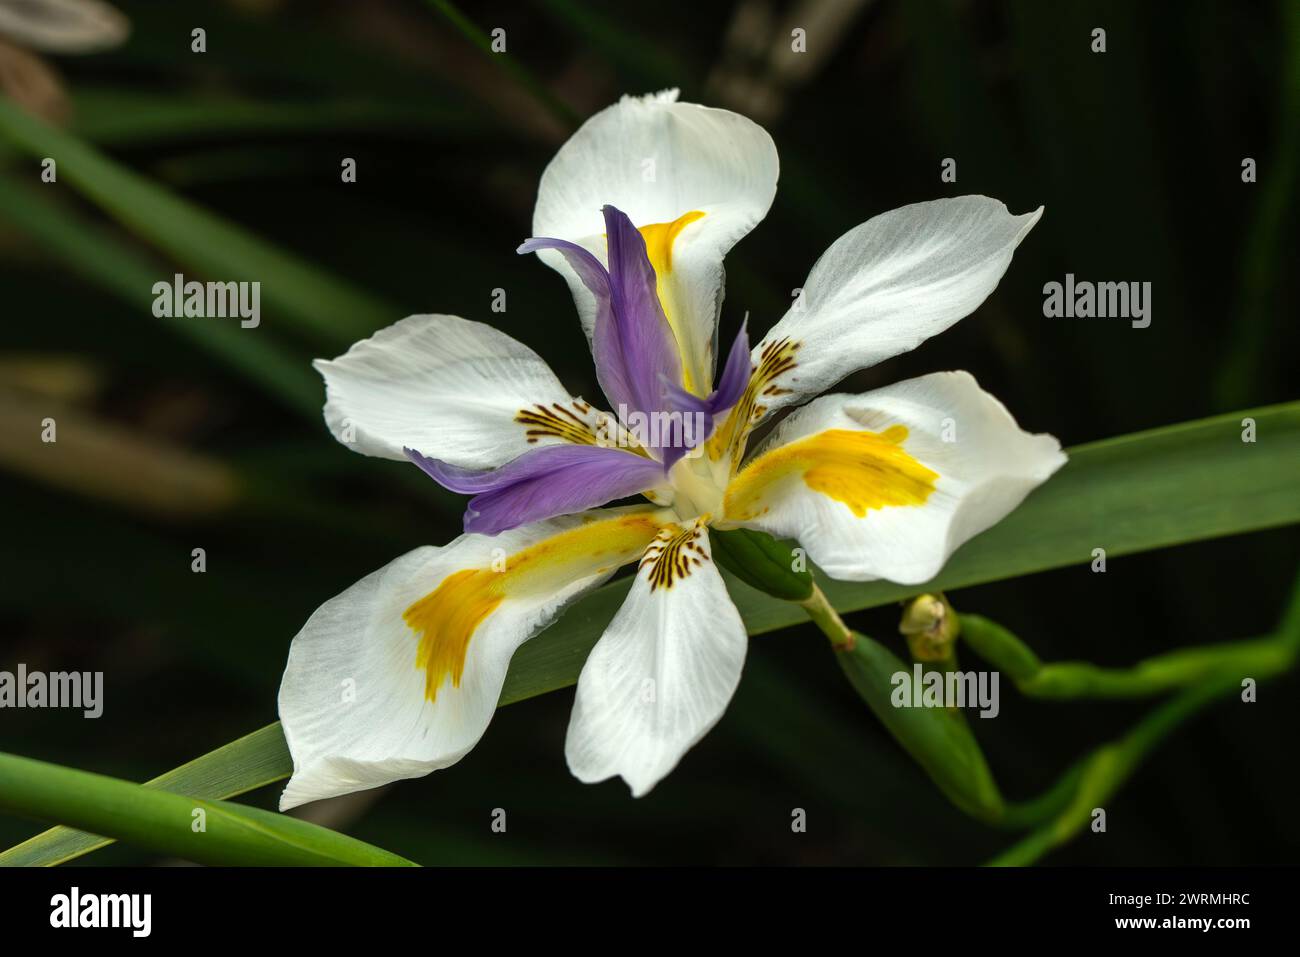 Dietes grandiflora a native South African summer evergreen flowering plant with a violet and yellow summertime flower commonly known as fortnightly li Stock Photo